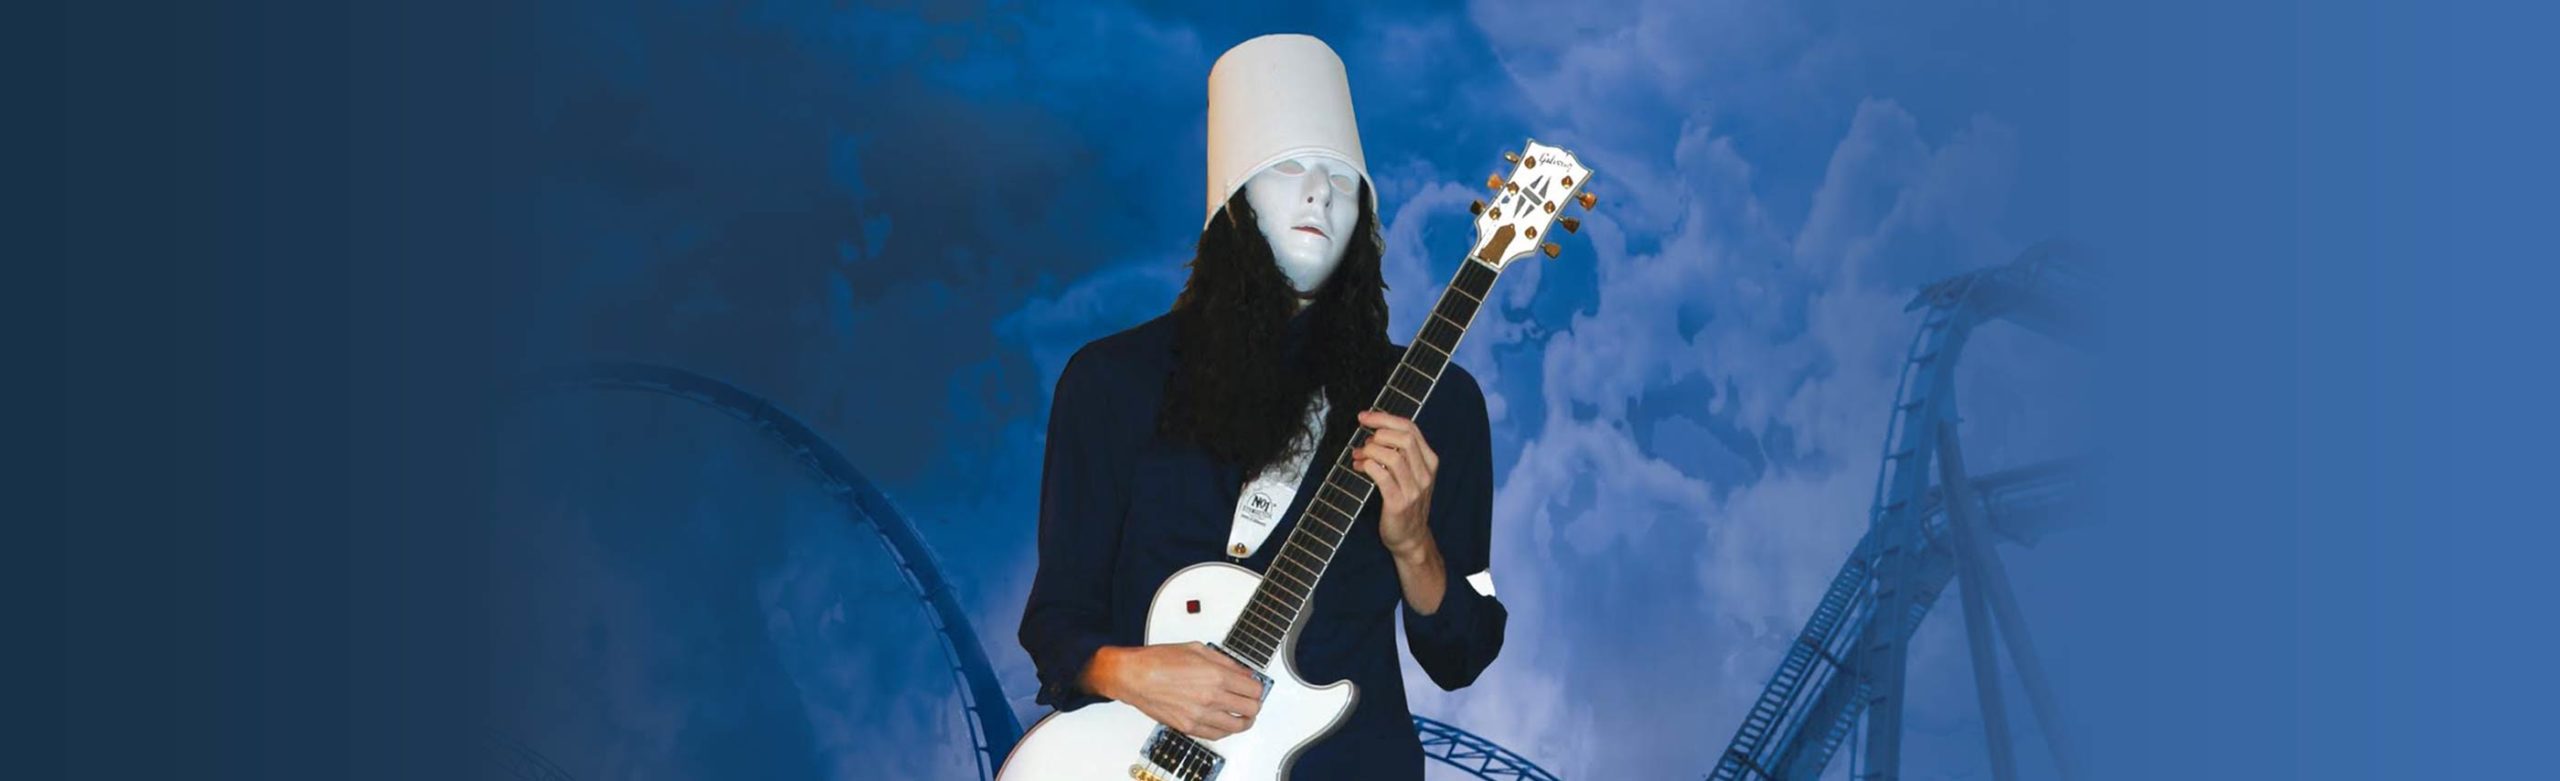 JUST ANNOUNCED: Guitar Virtuoso Buckethead to Perform Headlining Concert in Missoula Image